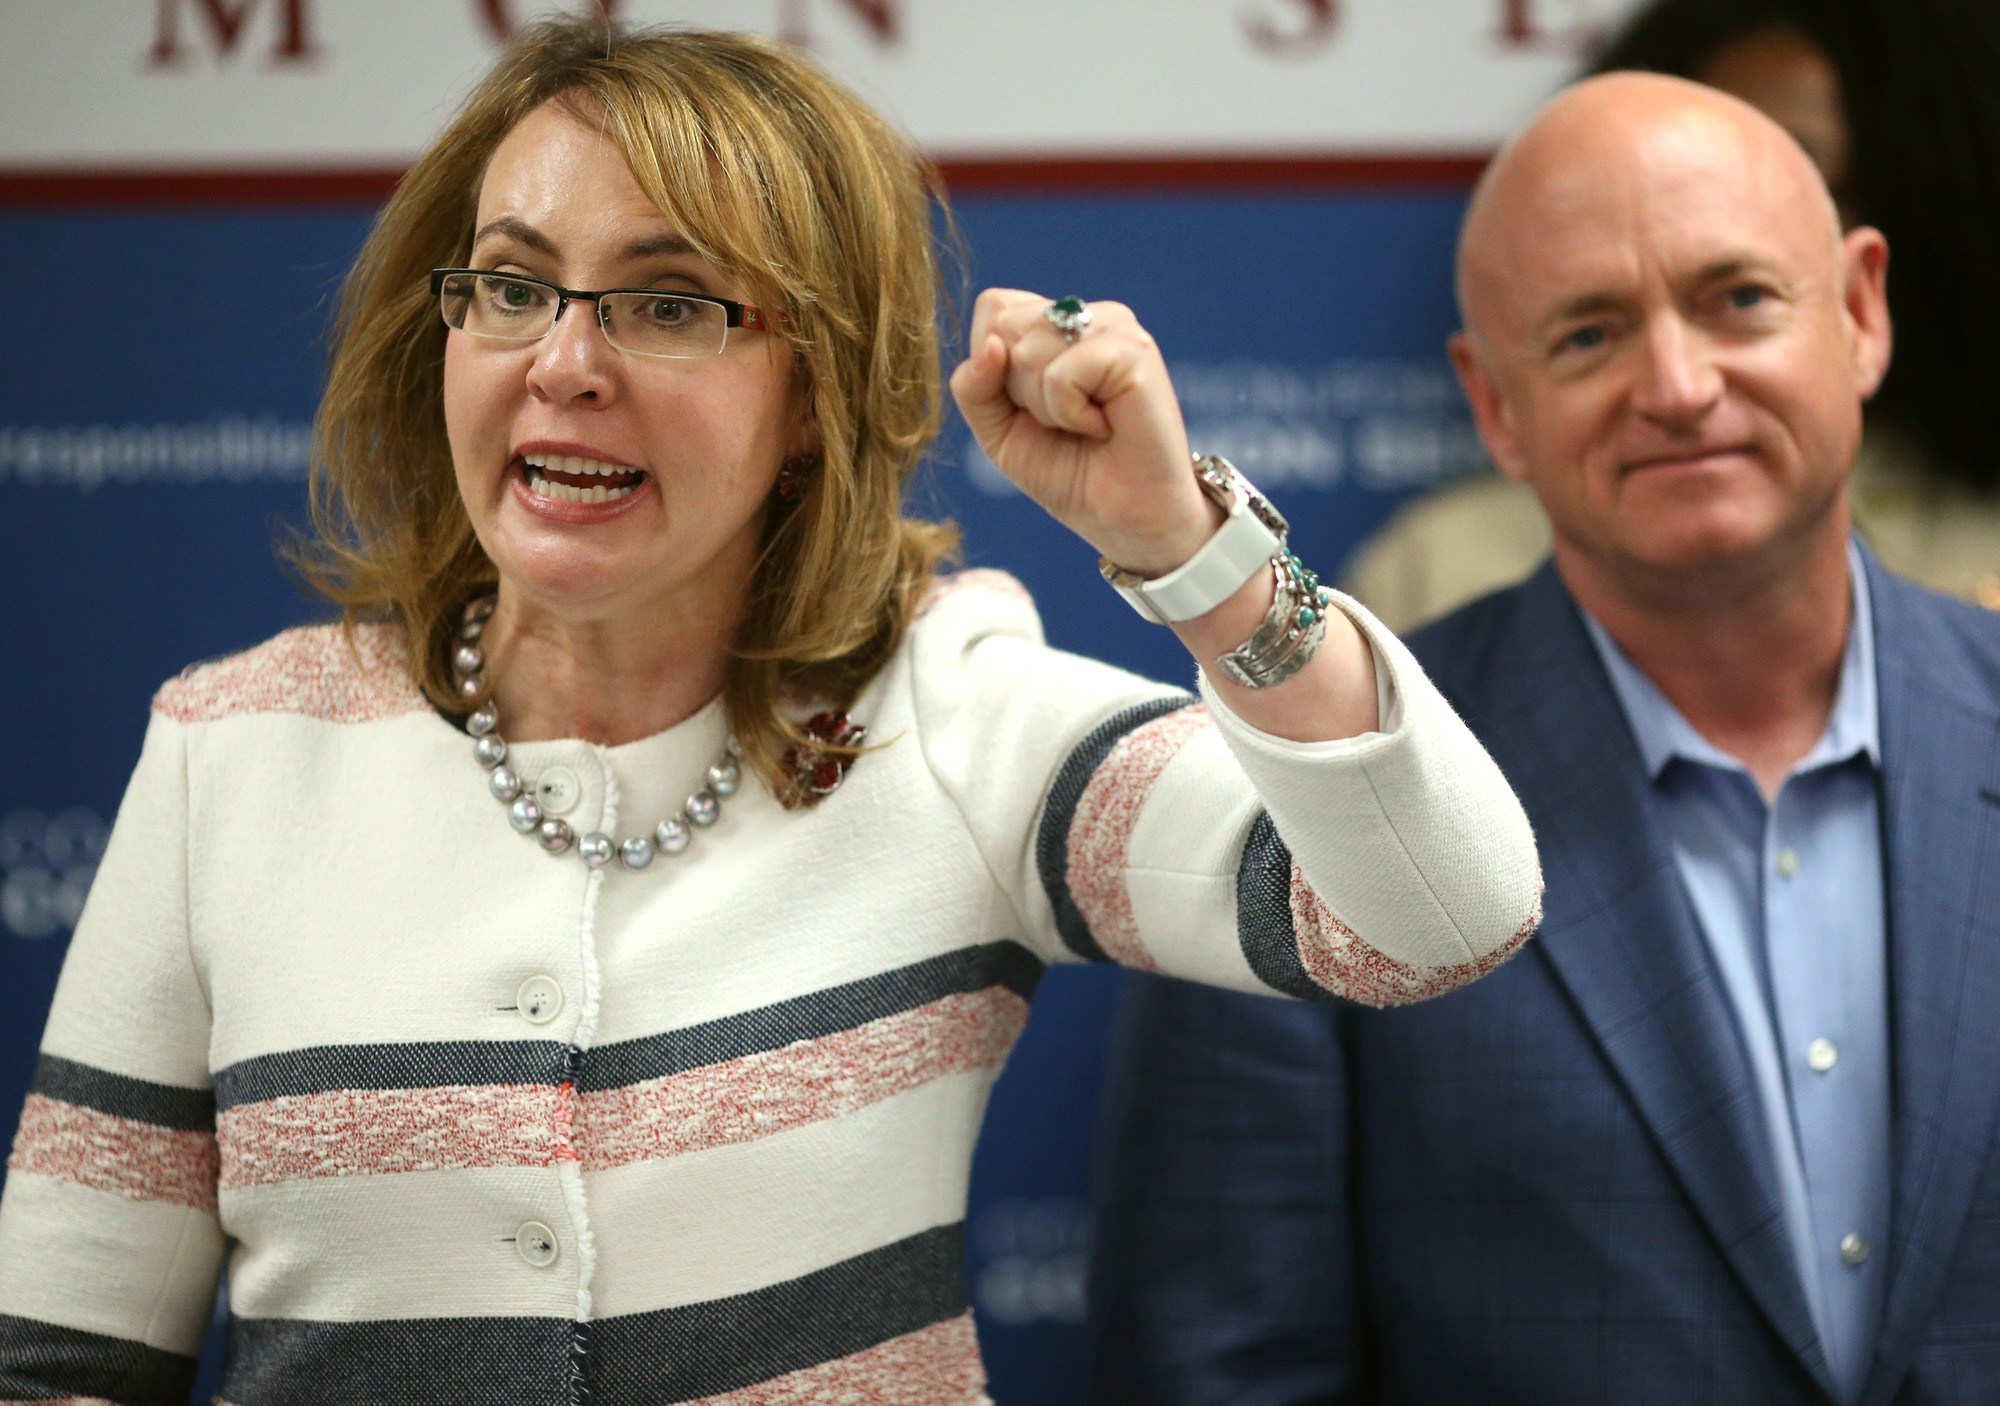 Gabby Giffords opens franchise in Minnesota, 3rd in 3 months